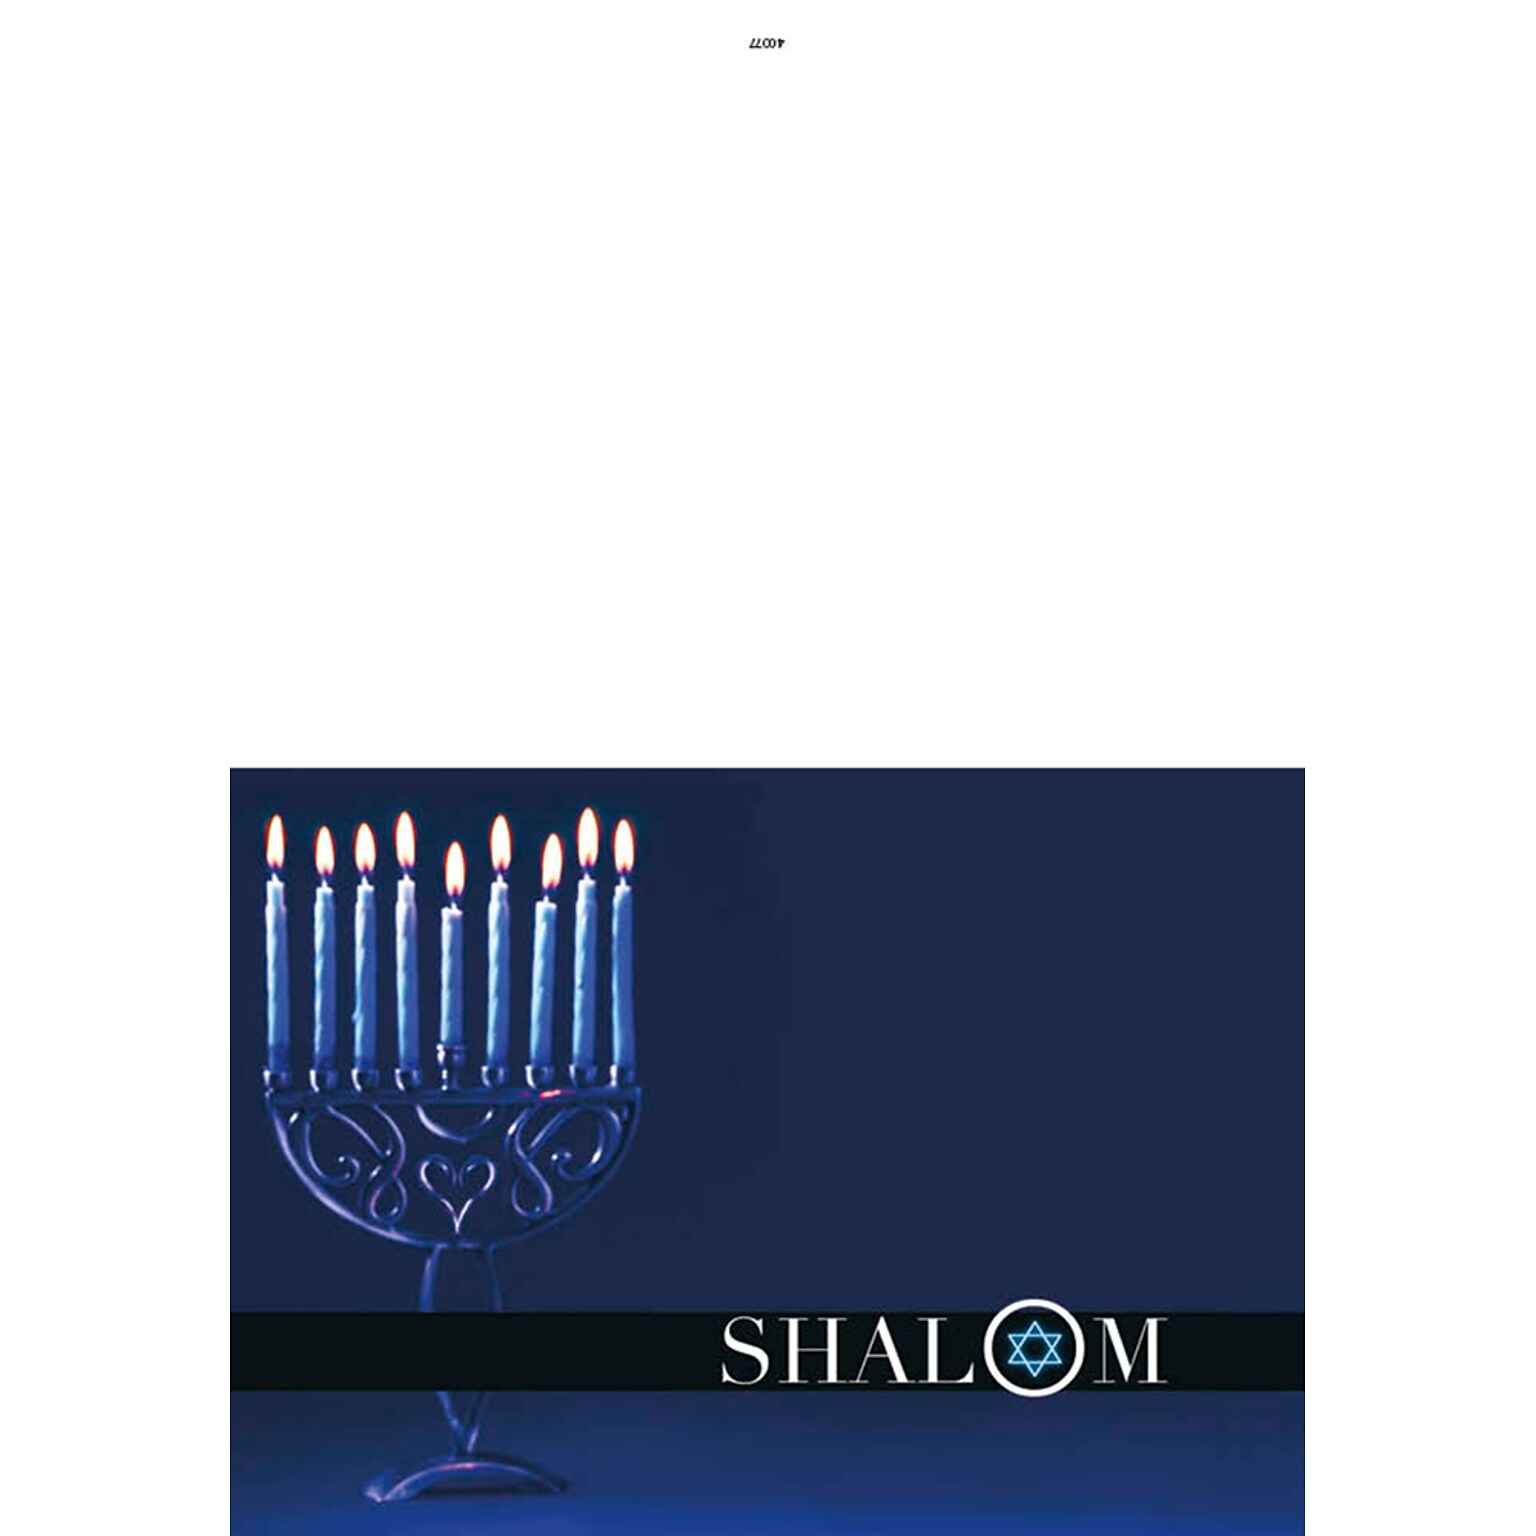 Shalom - candles - 7 x 10 scored for folding to 7 x 5, 25 cards w/A7 envelopes per set